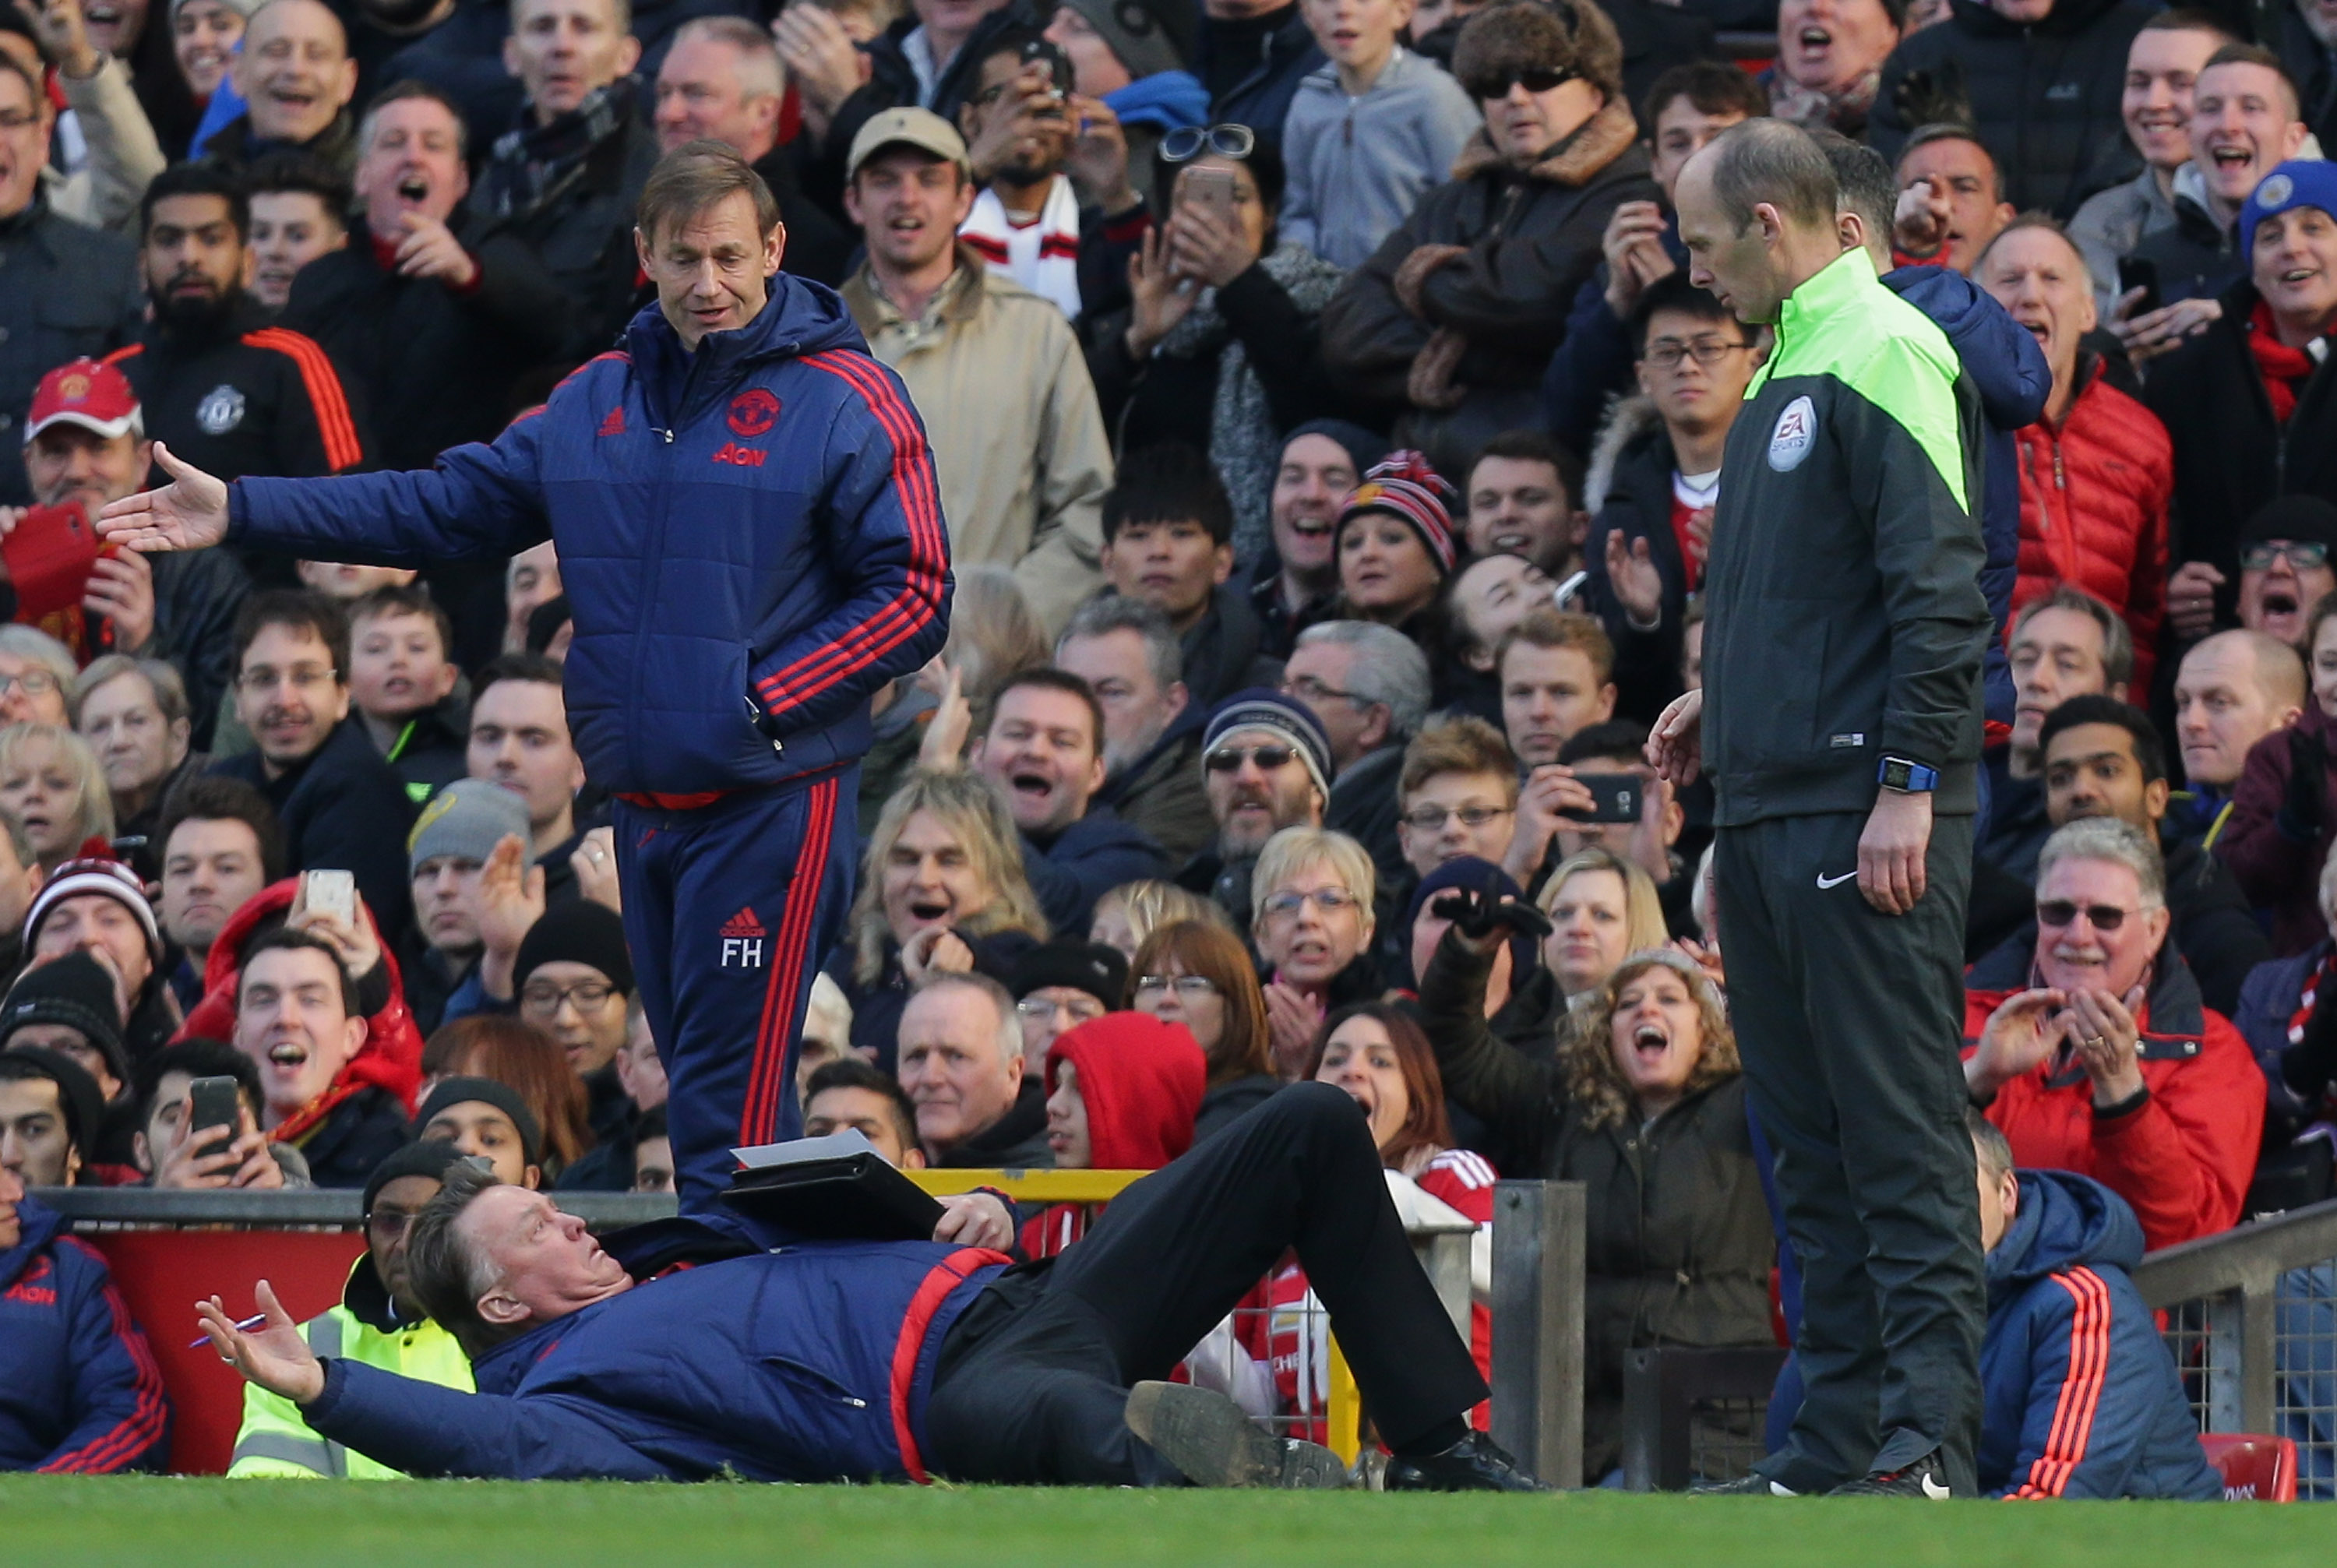 Van Gaal infamously laid down in front of Mike Dean against Arsenal